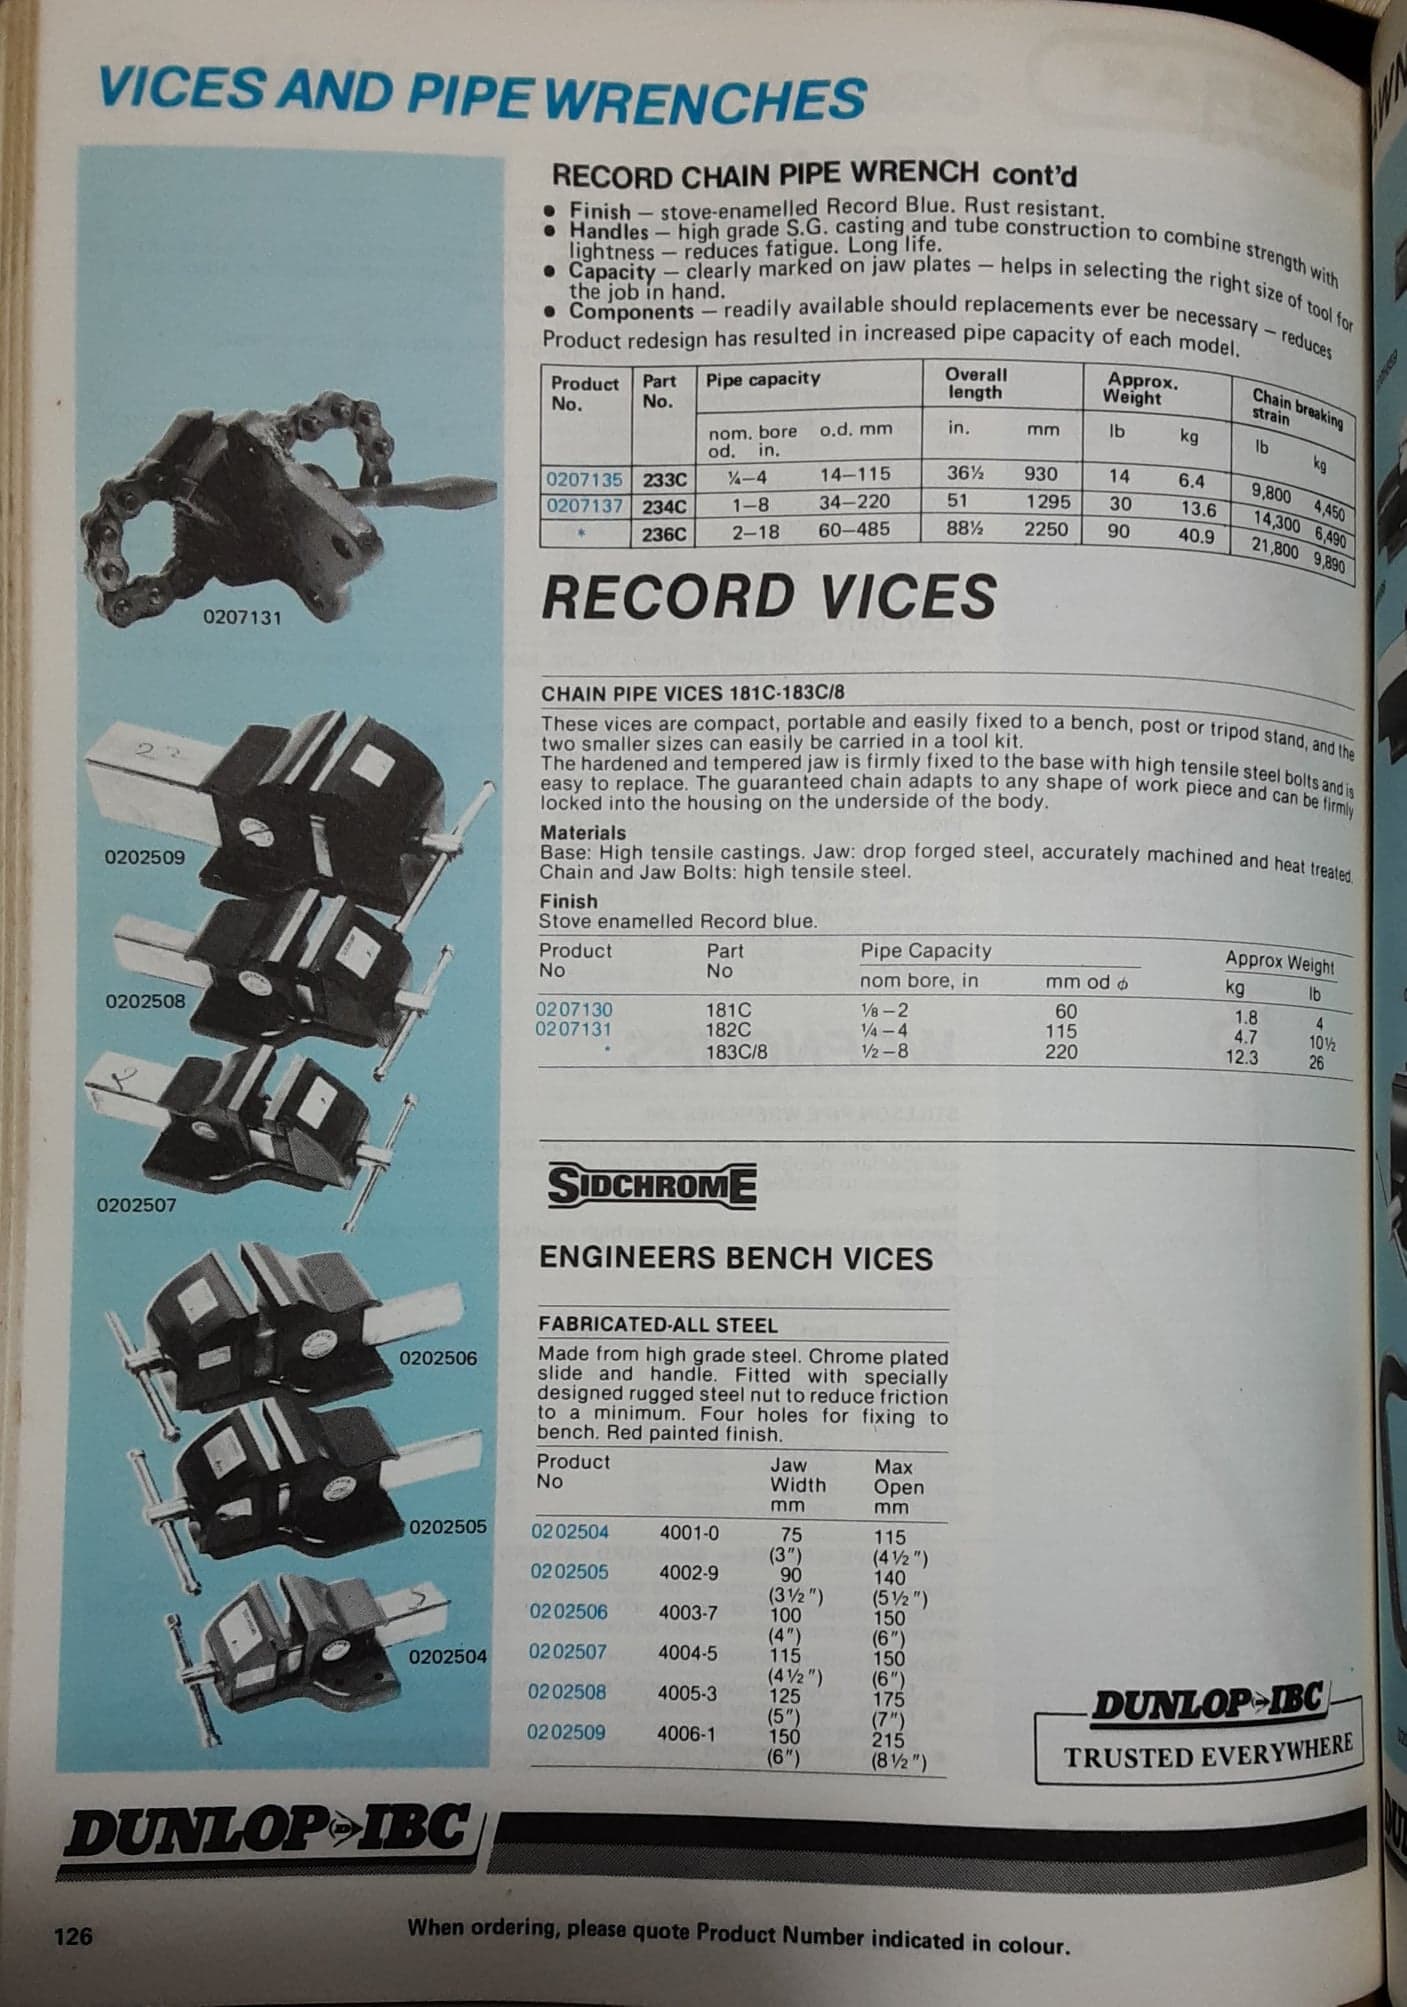 Here's a Joplin fabricated steel vice for sale under the Sidchrome brand, from 1984